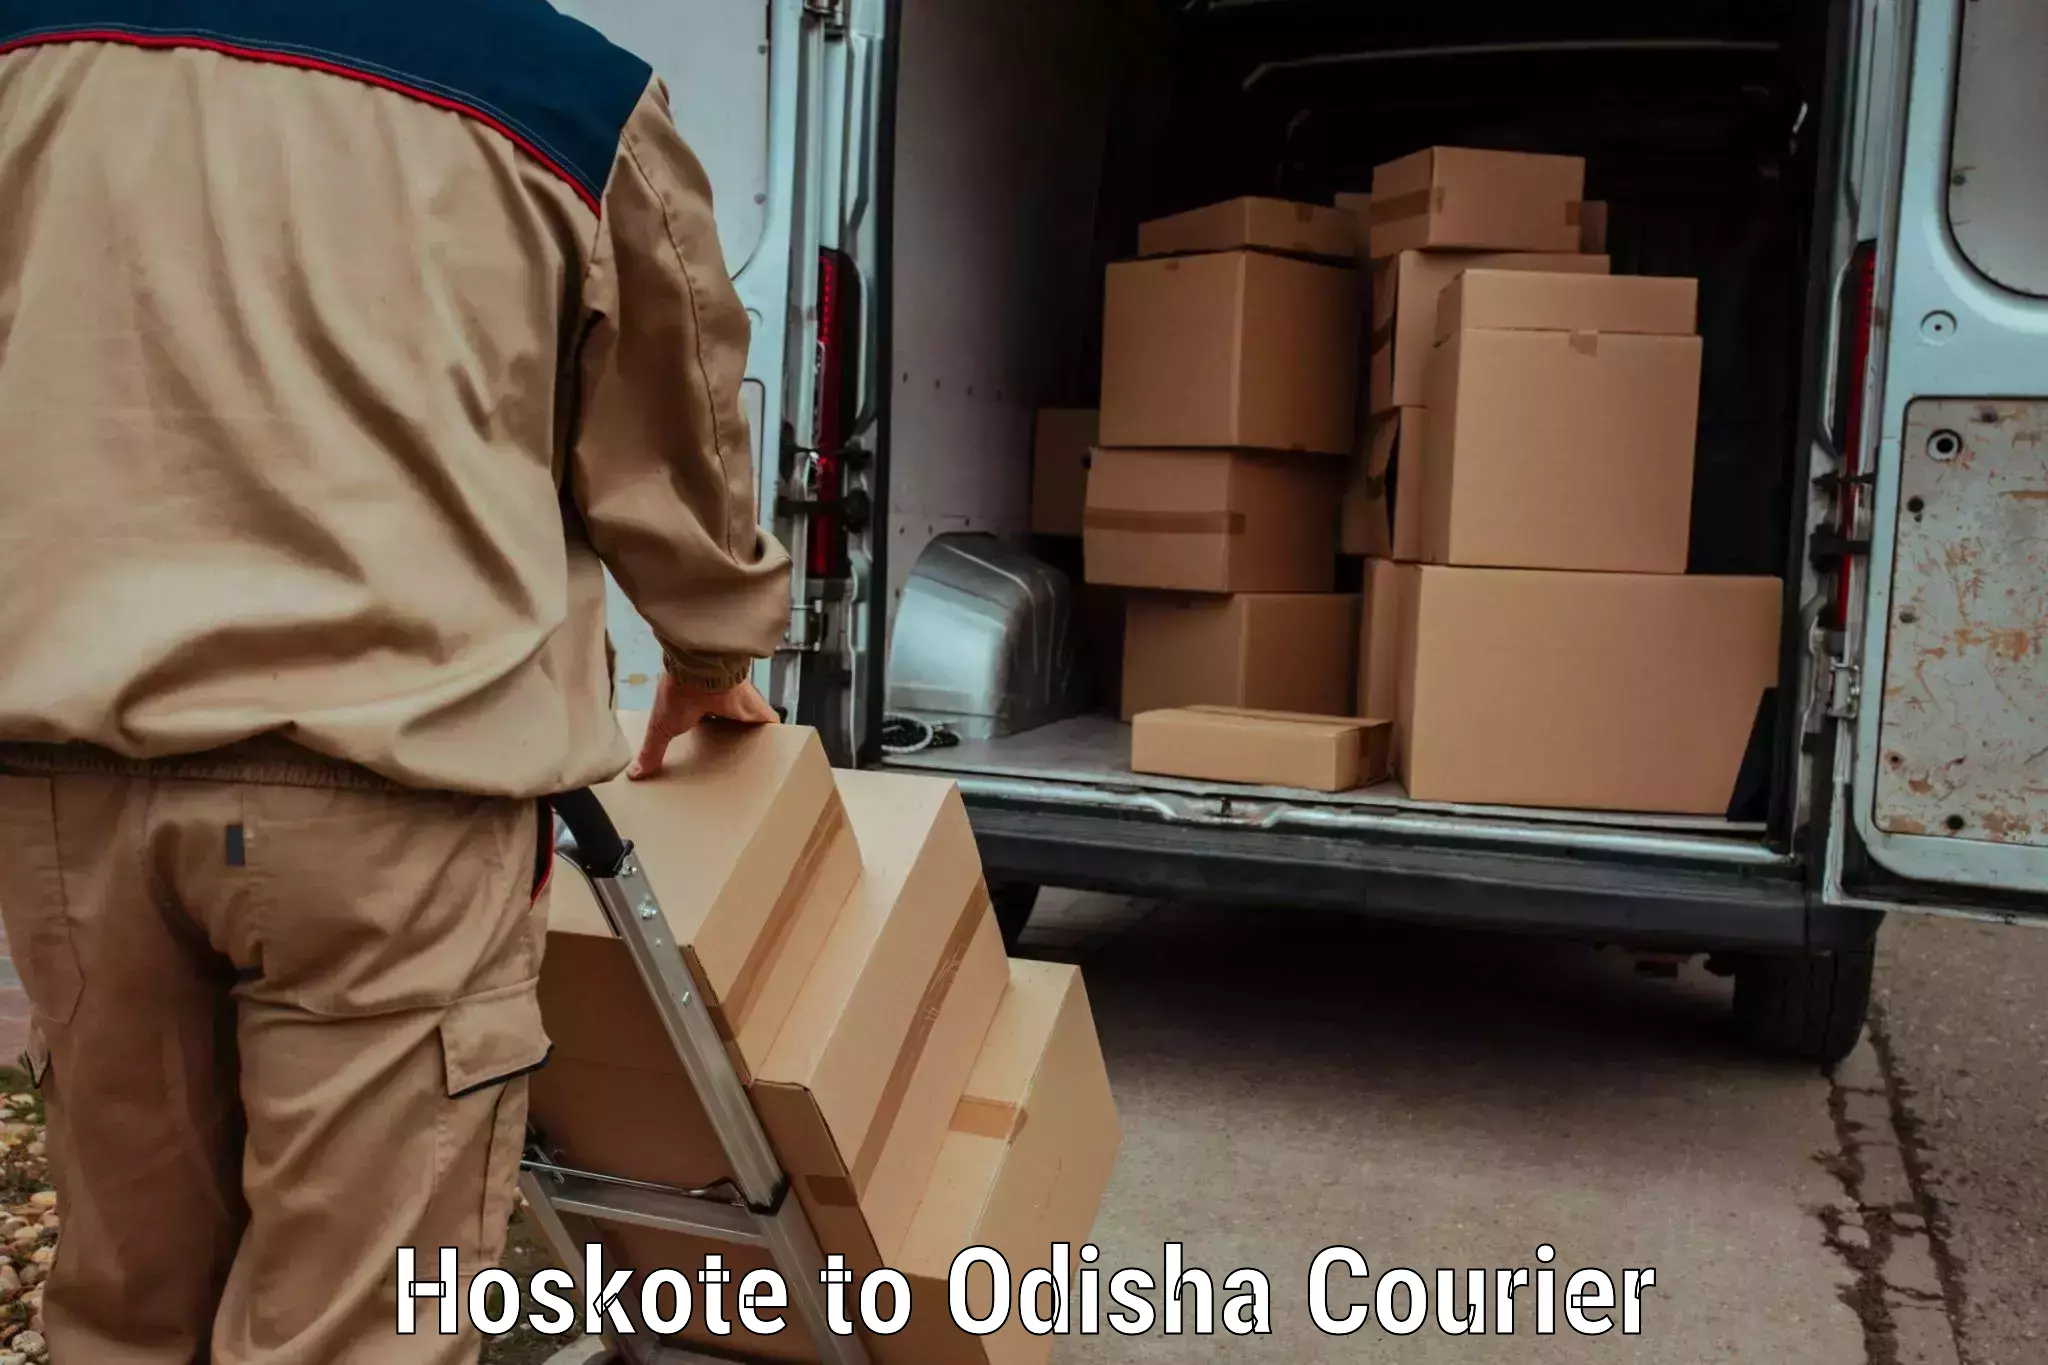 Efficient package consolidation Hoskote to Sohela